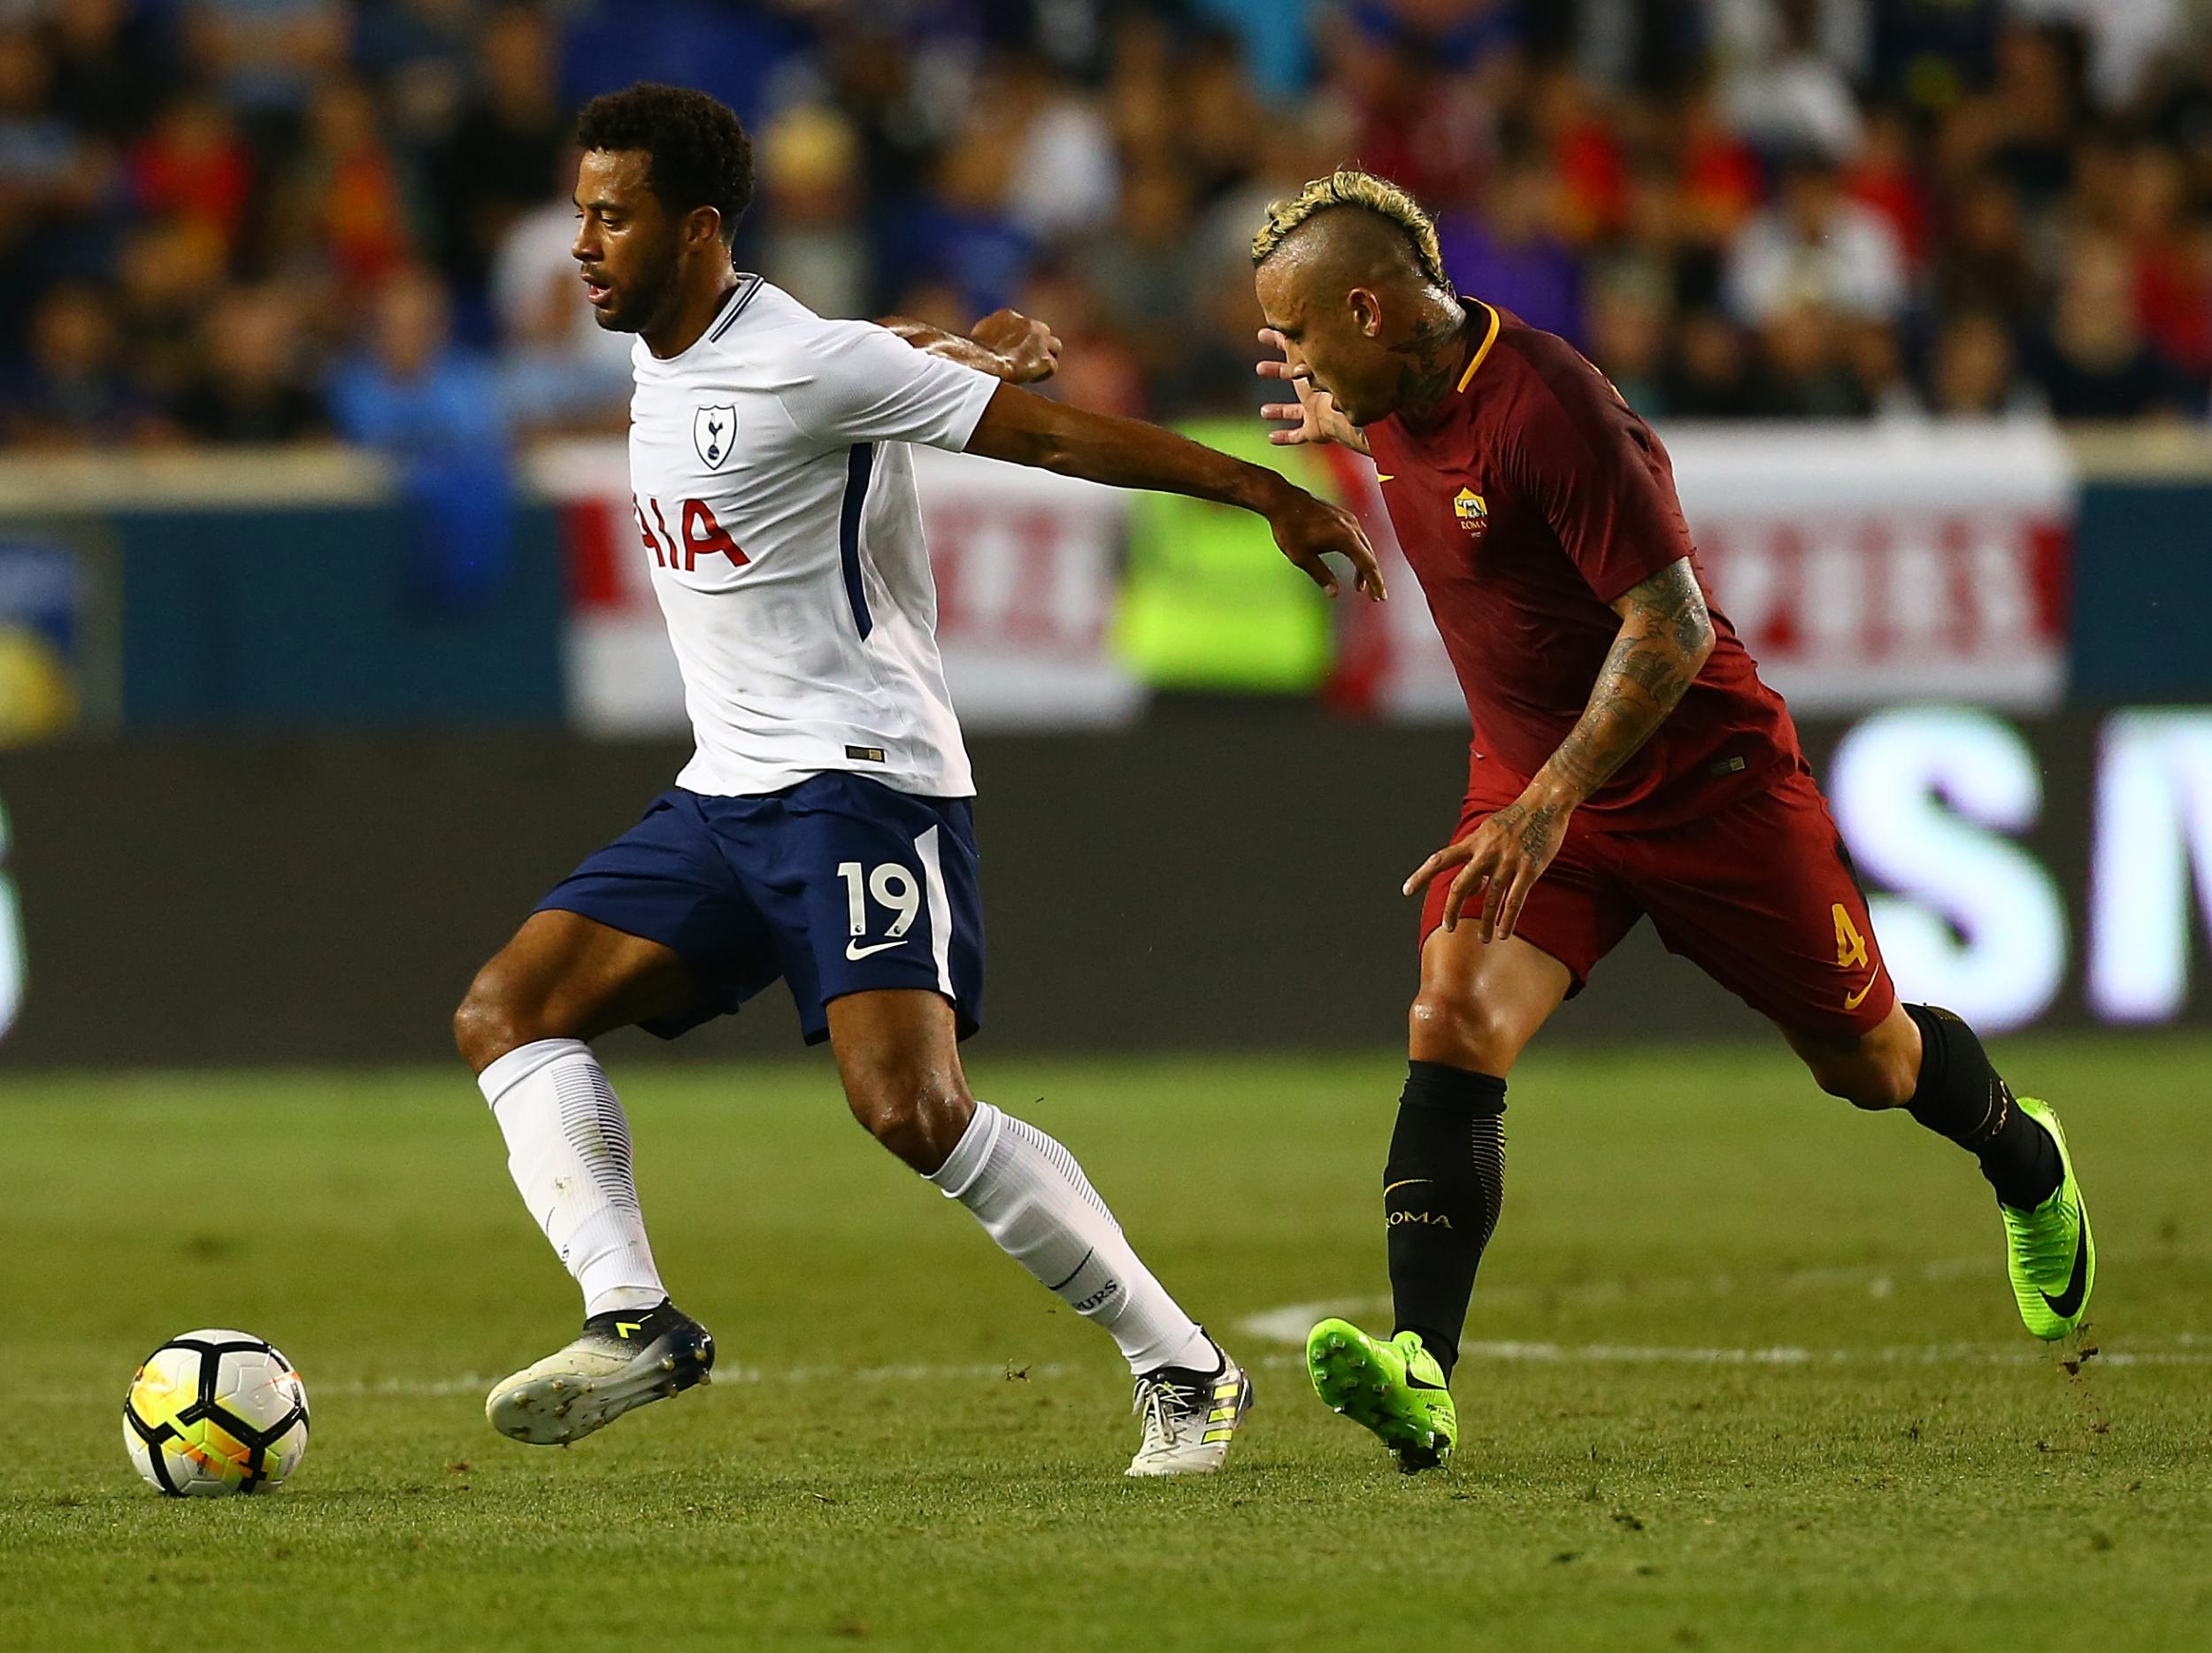 Nainggolan in action against Spurs this summer